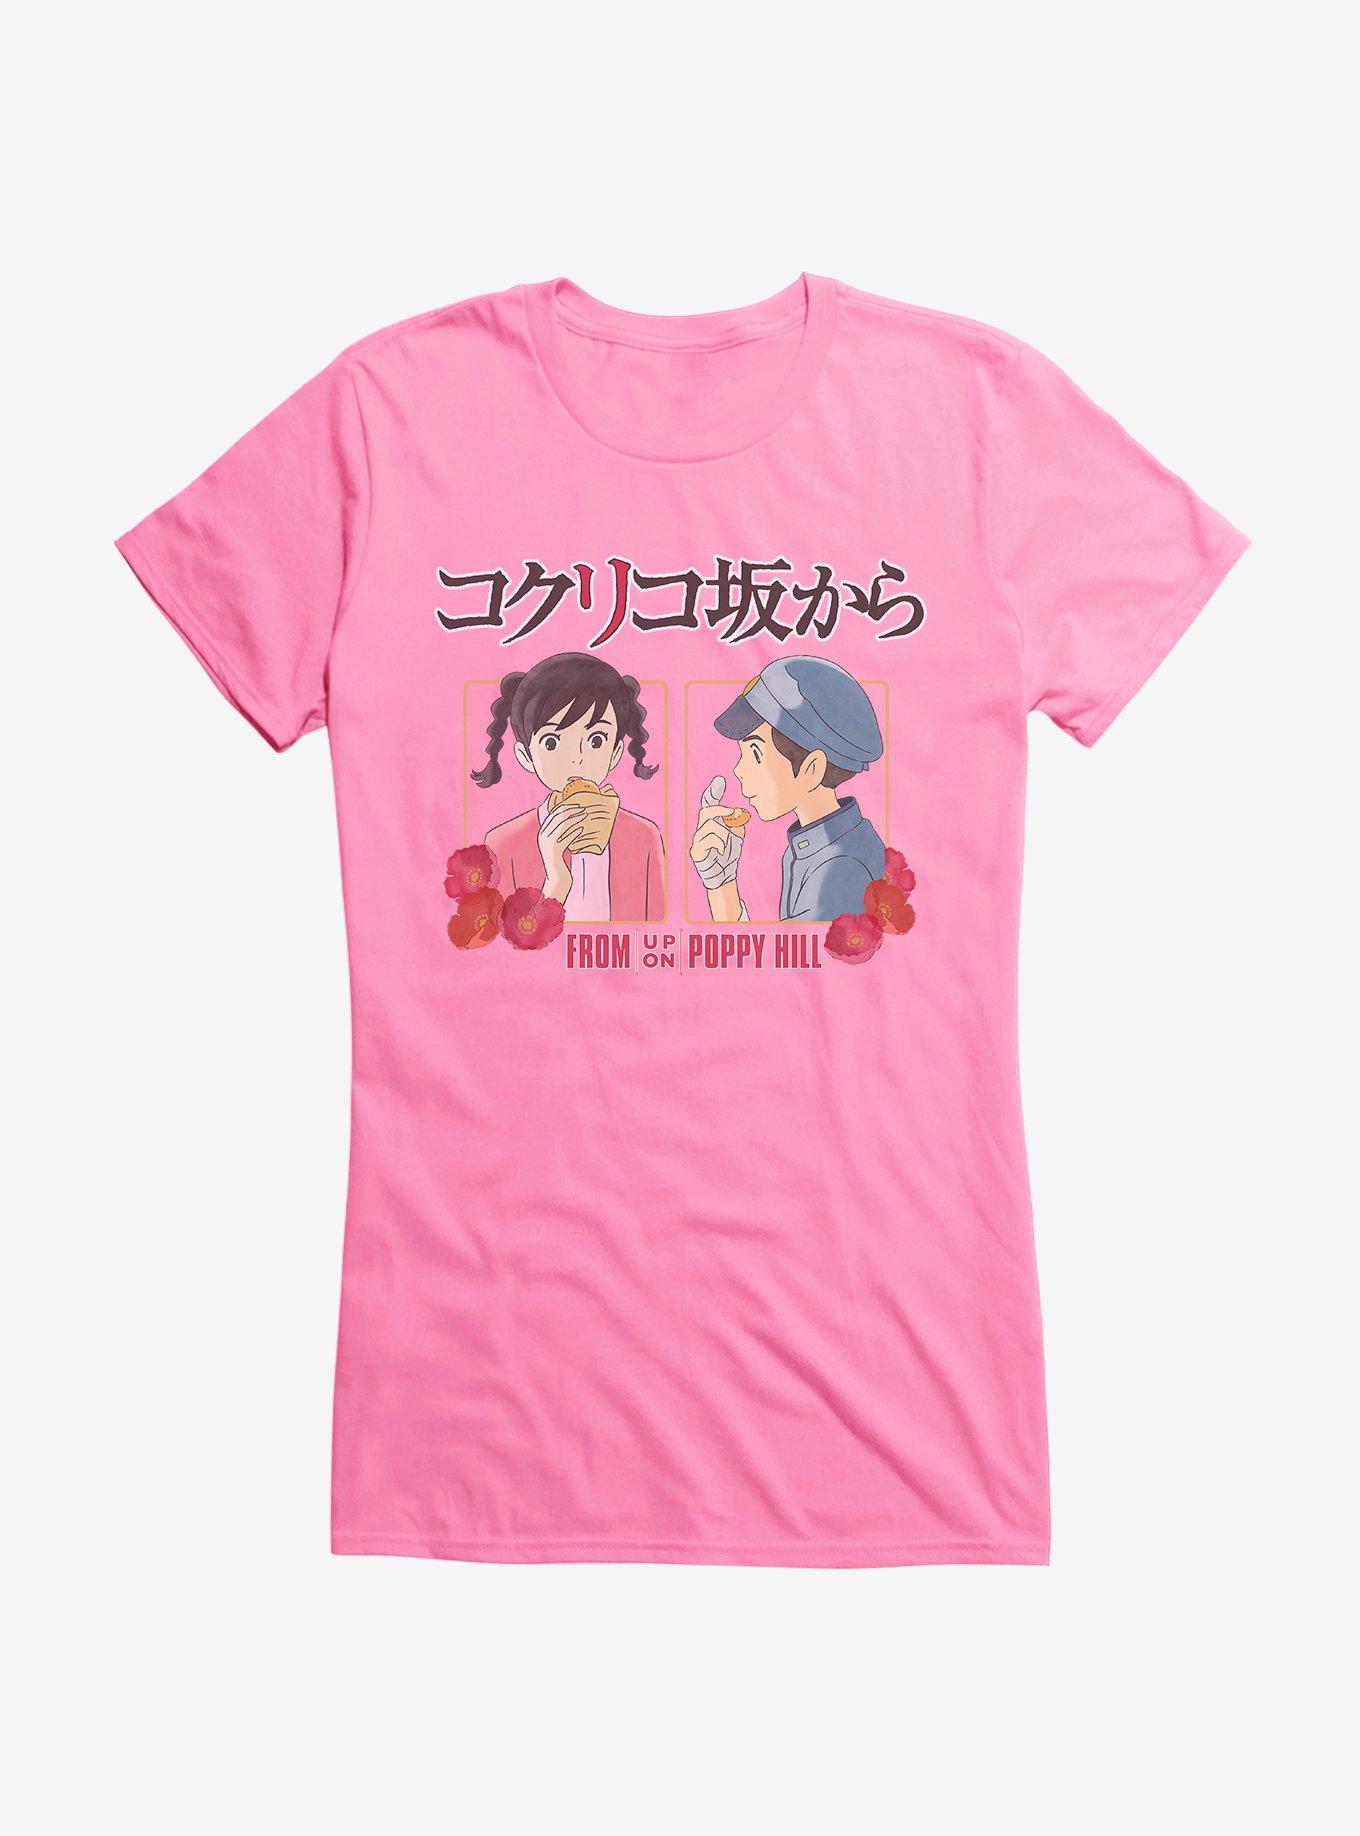 Studio Ghibli From Up On Poppy Hill Snacks Girls T-Shirt, CHARITY PINK, hi-res